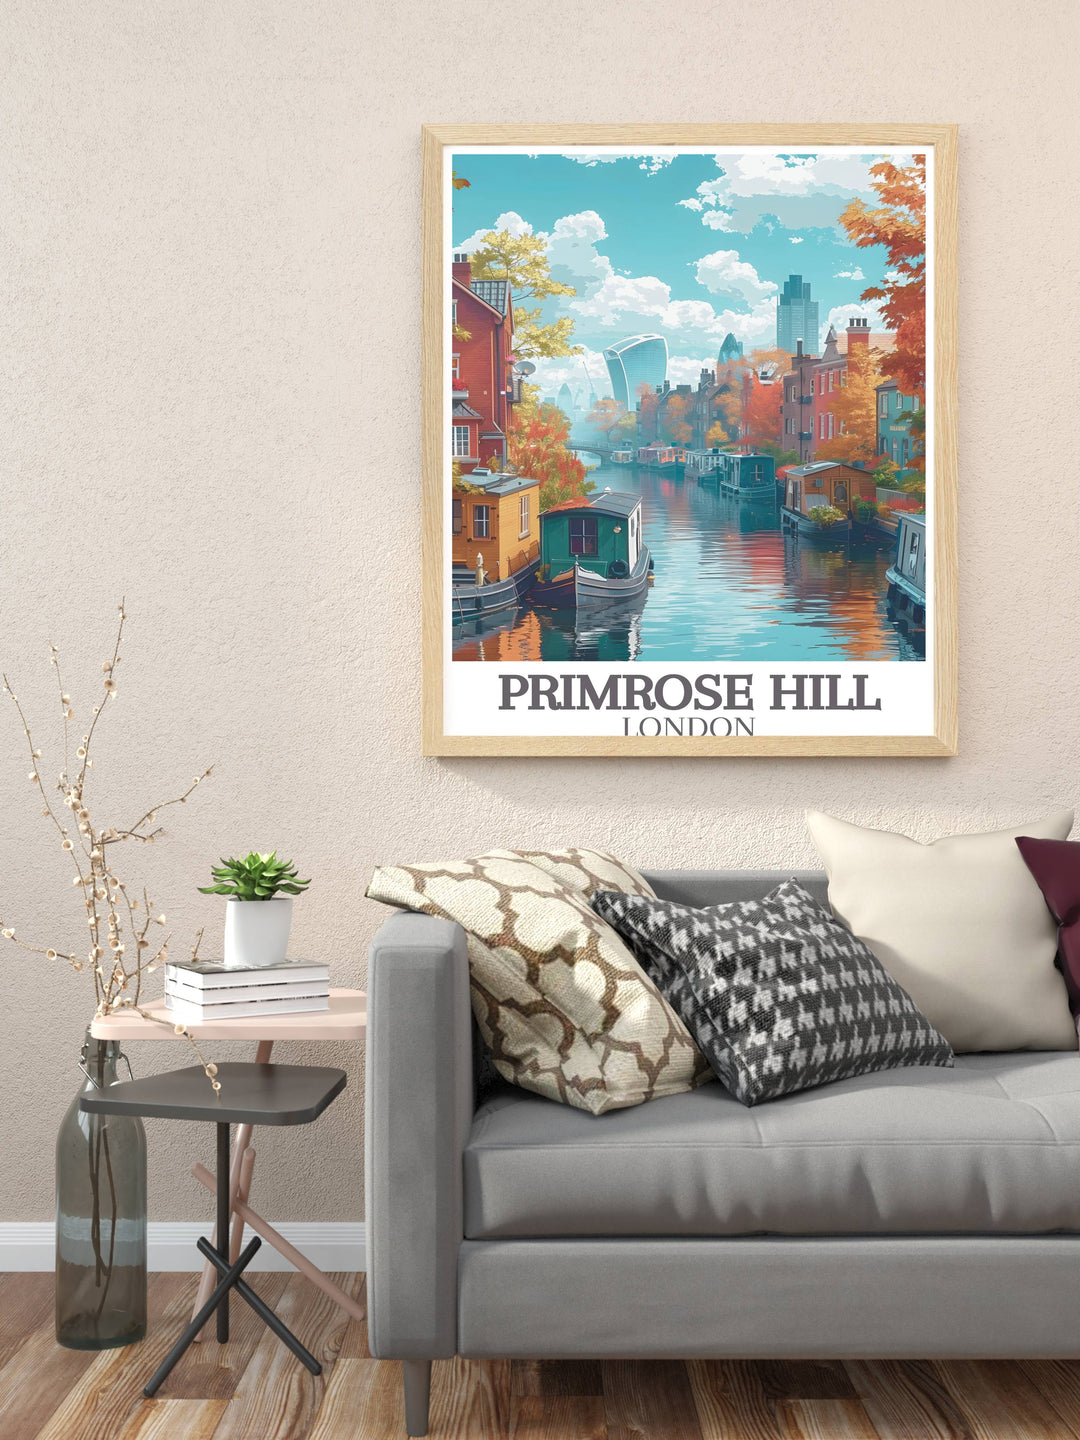 London Wall Art capturing the timeless charm of Primrose Hill and Camden Town, perfect for any decor.